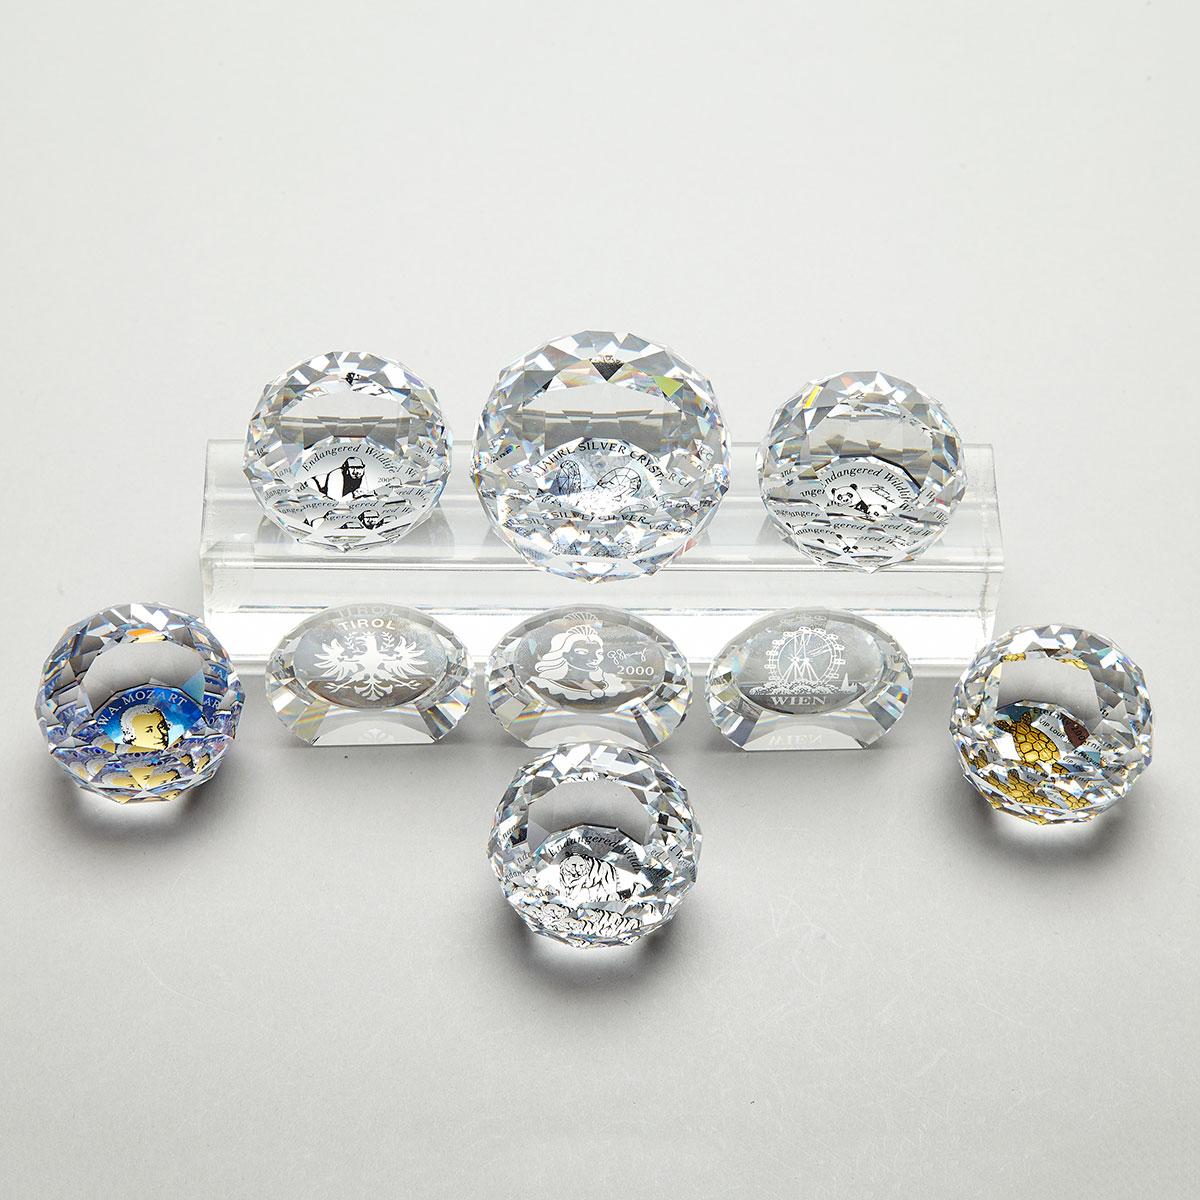 Nine Swarovski Crystal Paperweights, late 20th/early 21st century